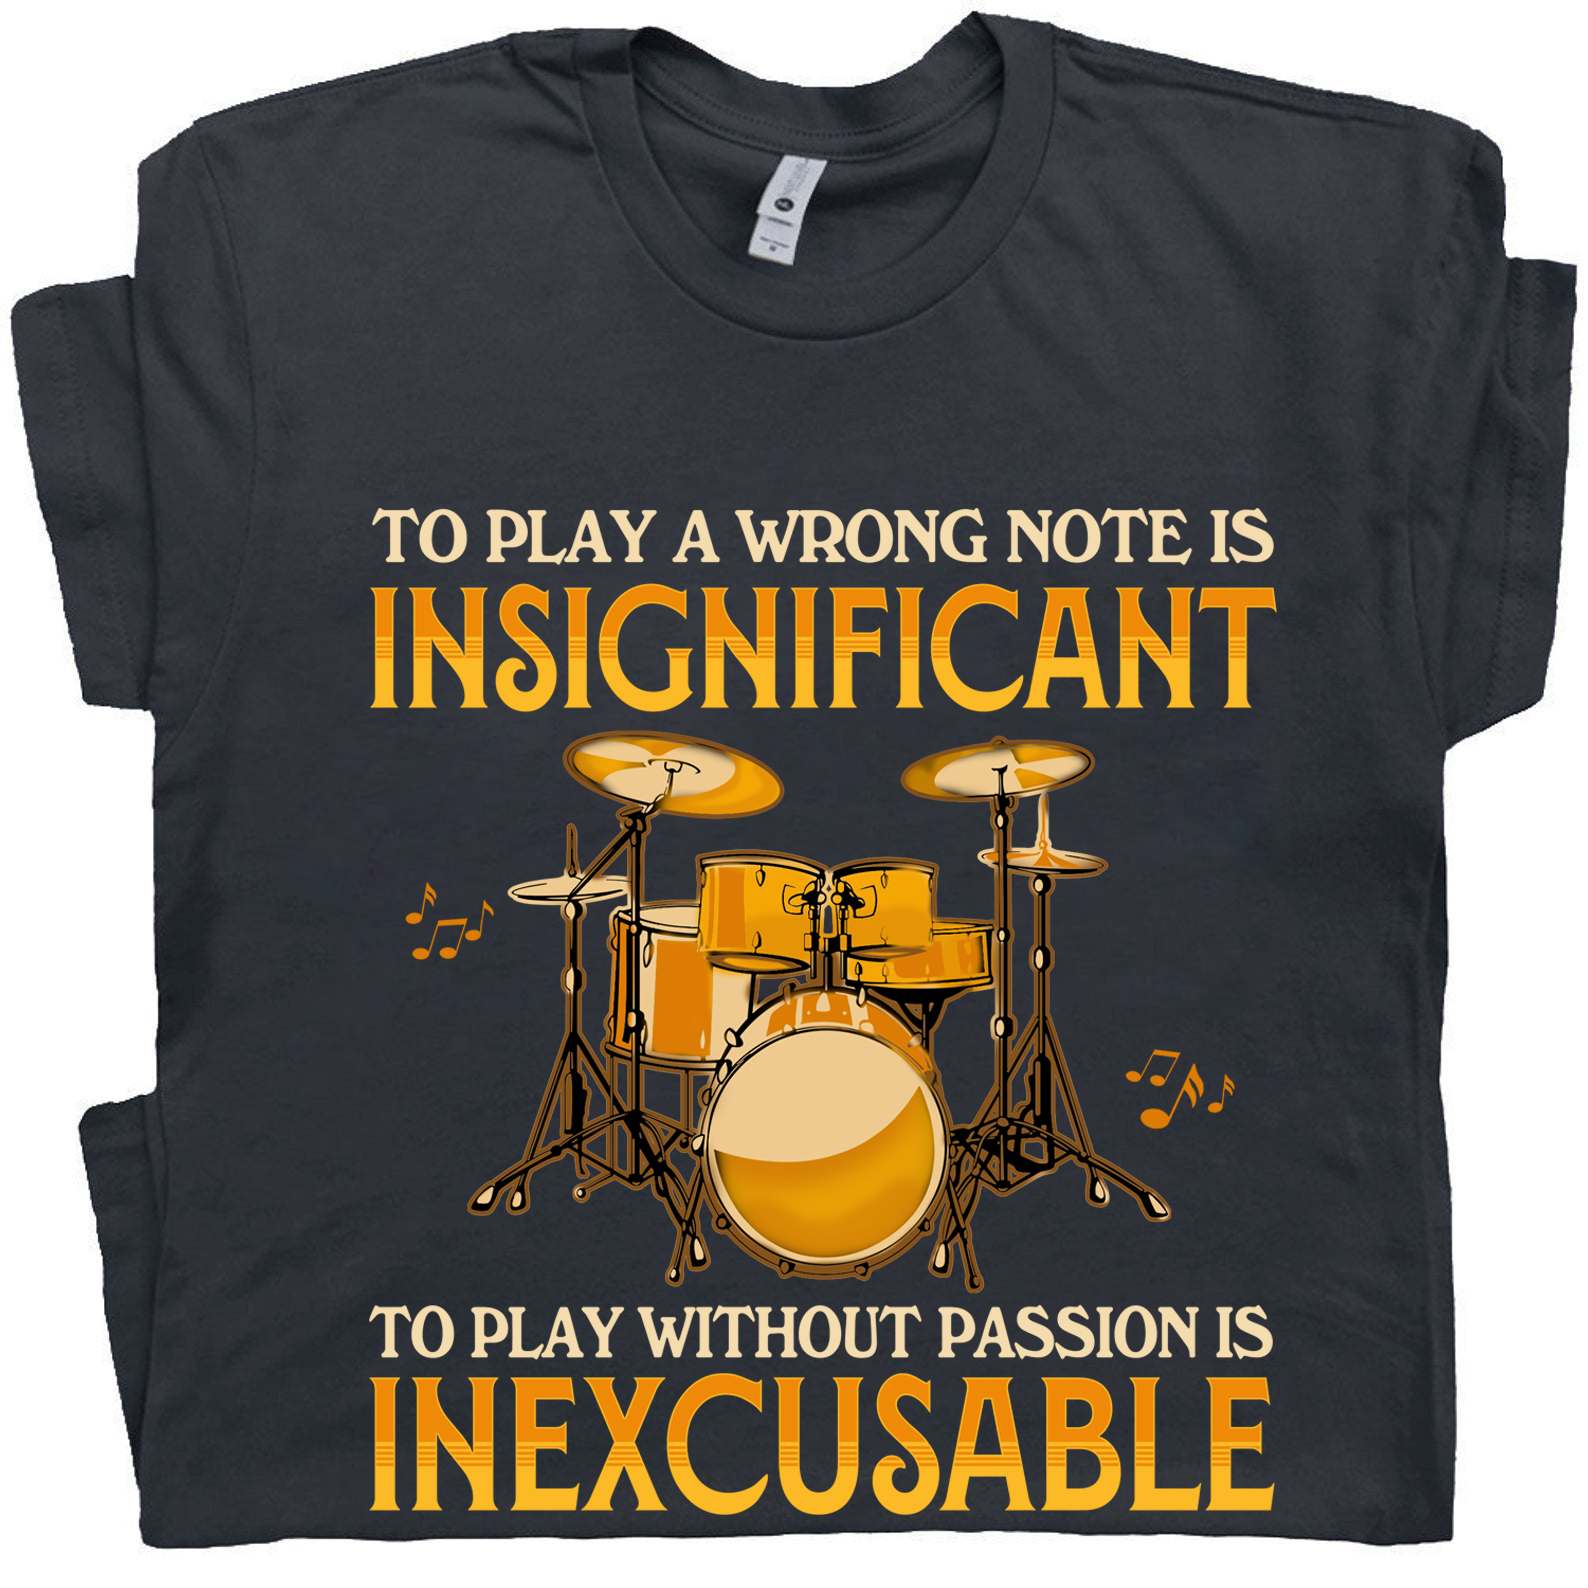 To play a wrong note is insignificant to play without passion is excusable - Passionate on drum